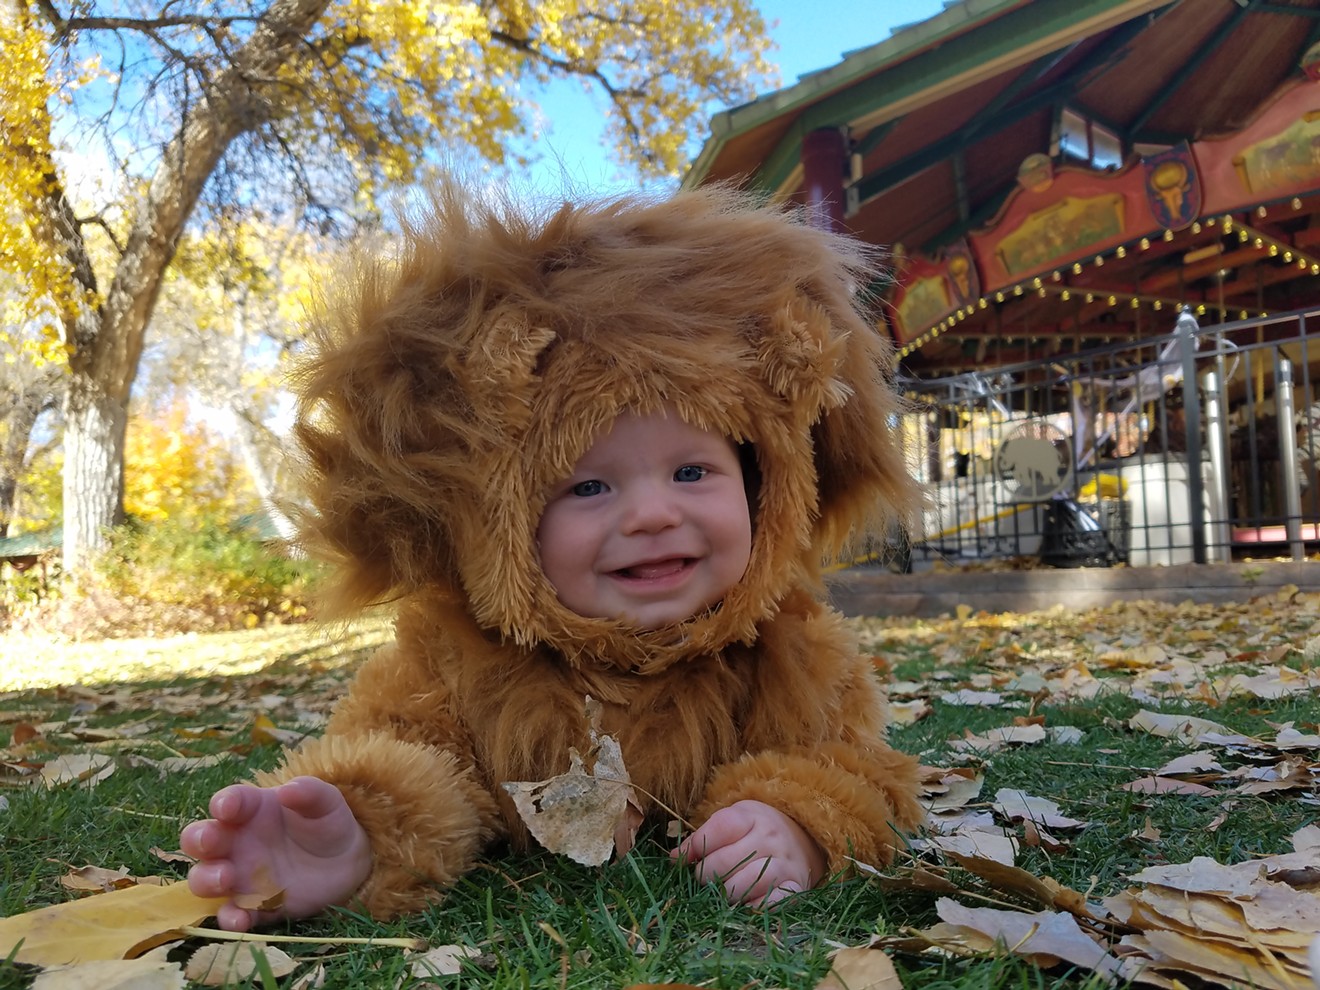 A wild baby lion roaming free during Boo at the Zoo.